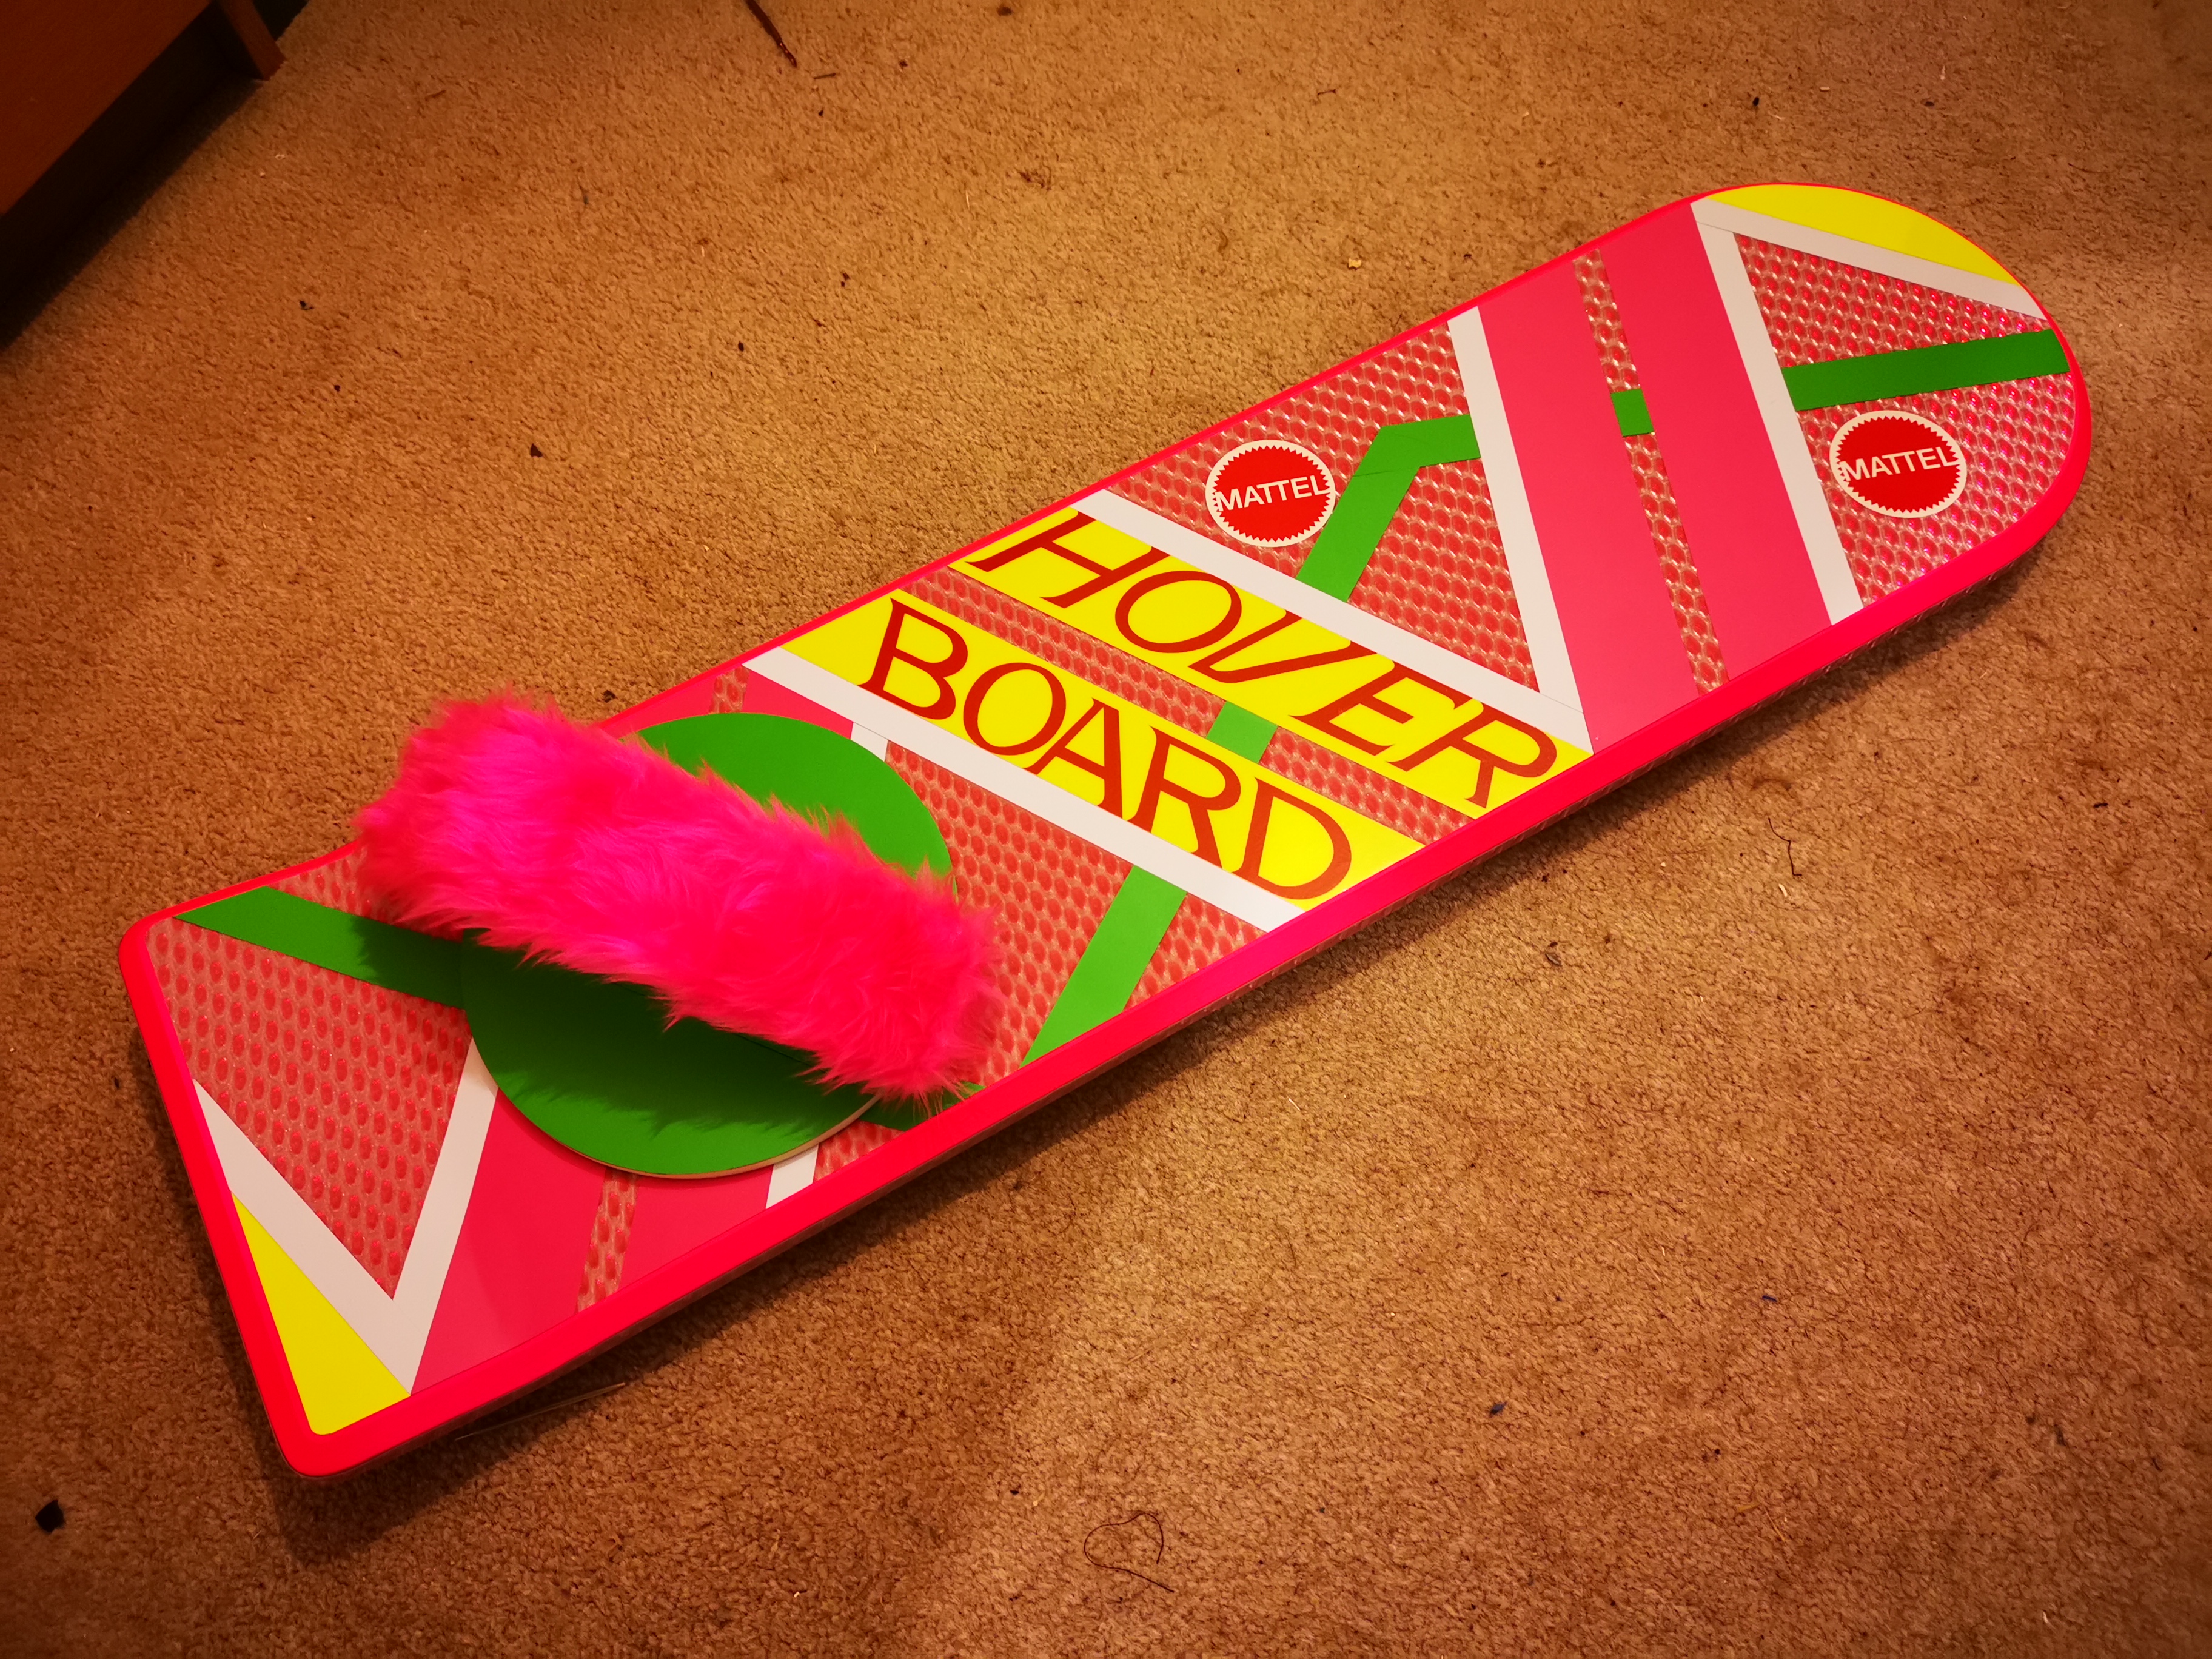 Done / Completed - Back To The Future Marty McFly 2015 Hover Board Run. |  RPF Costume and Prop Maker Community